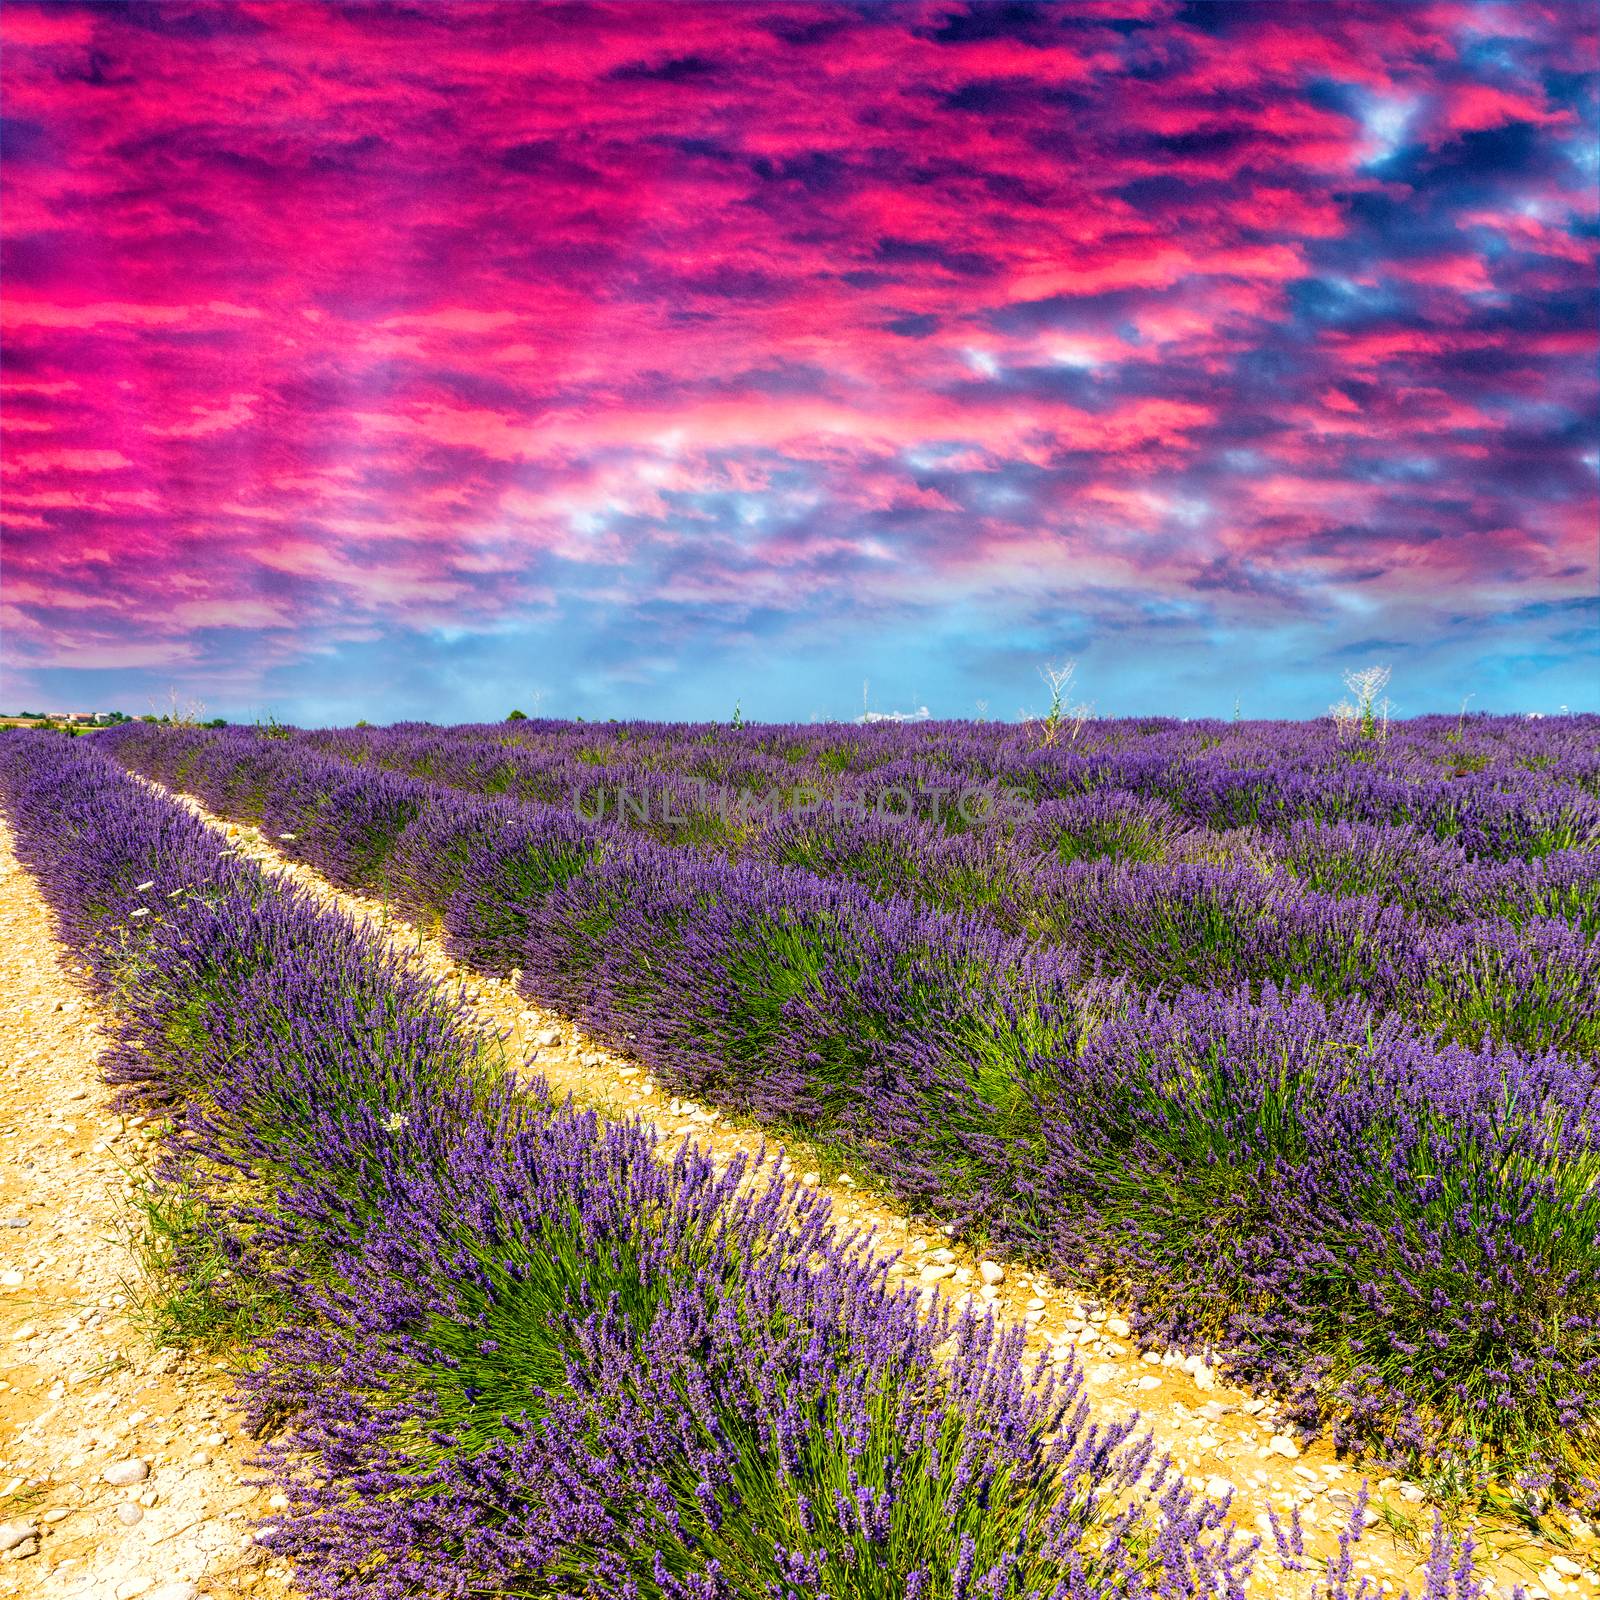 Lavender flower blooming scented fields in endless rows. Valenso by jovannig